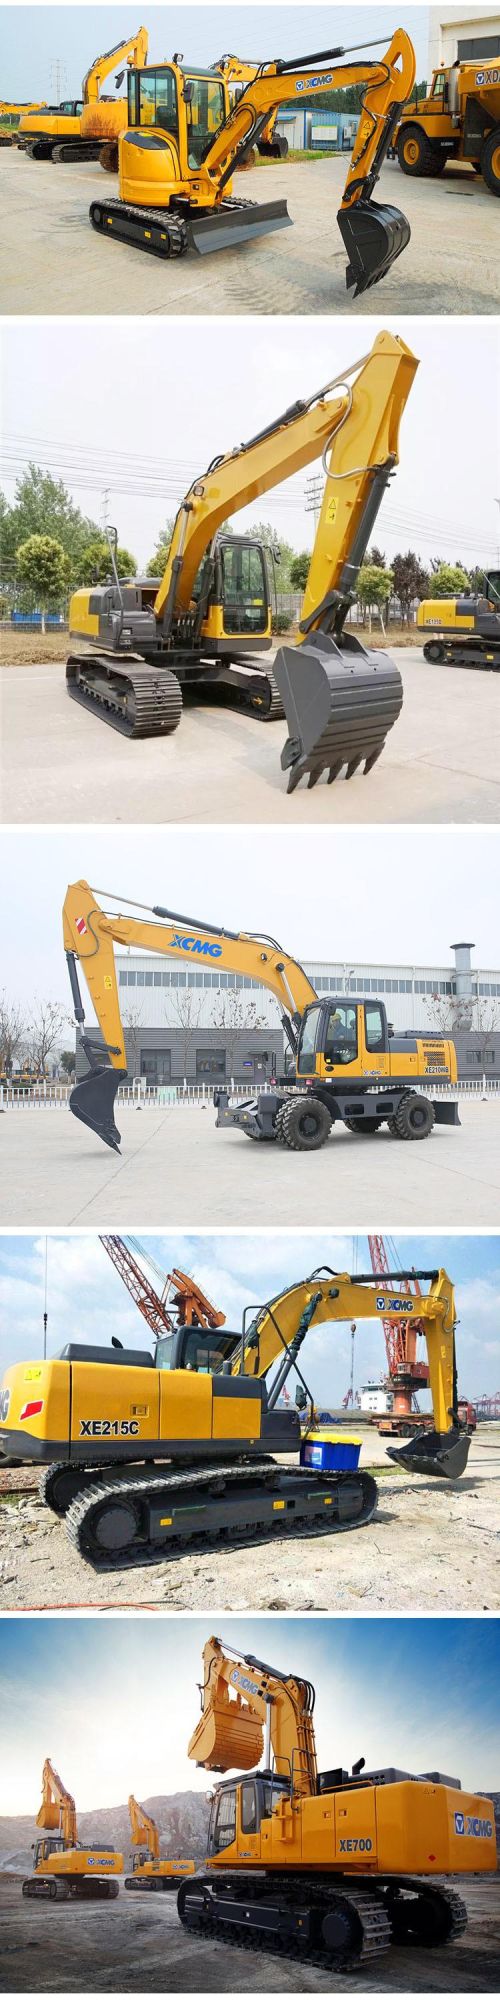 XCMG Official 1 Ton- 100 Ton Mini Small Digger Excavator, Hydraulic Wheel Excavator, Mining Crawler Excavator Machine, China New Excavator with Parts for Sale